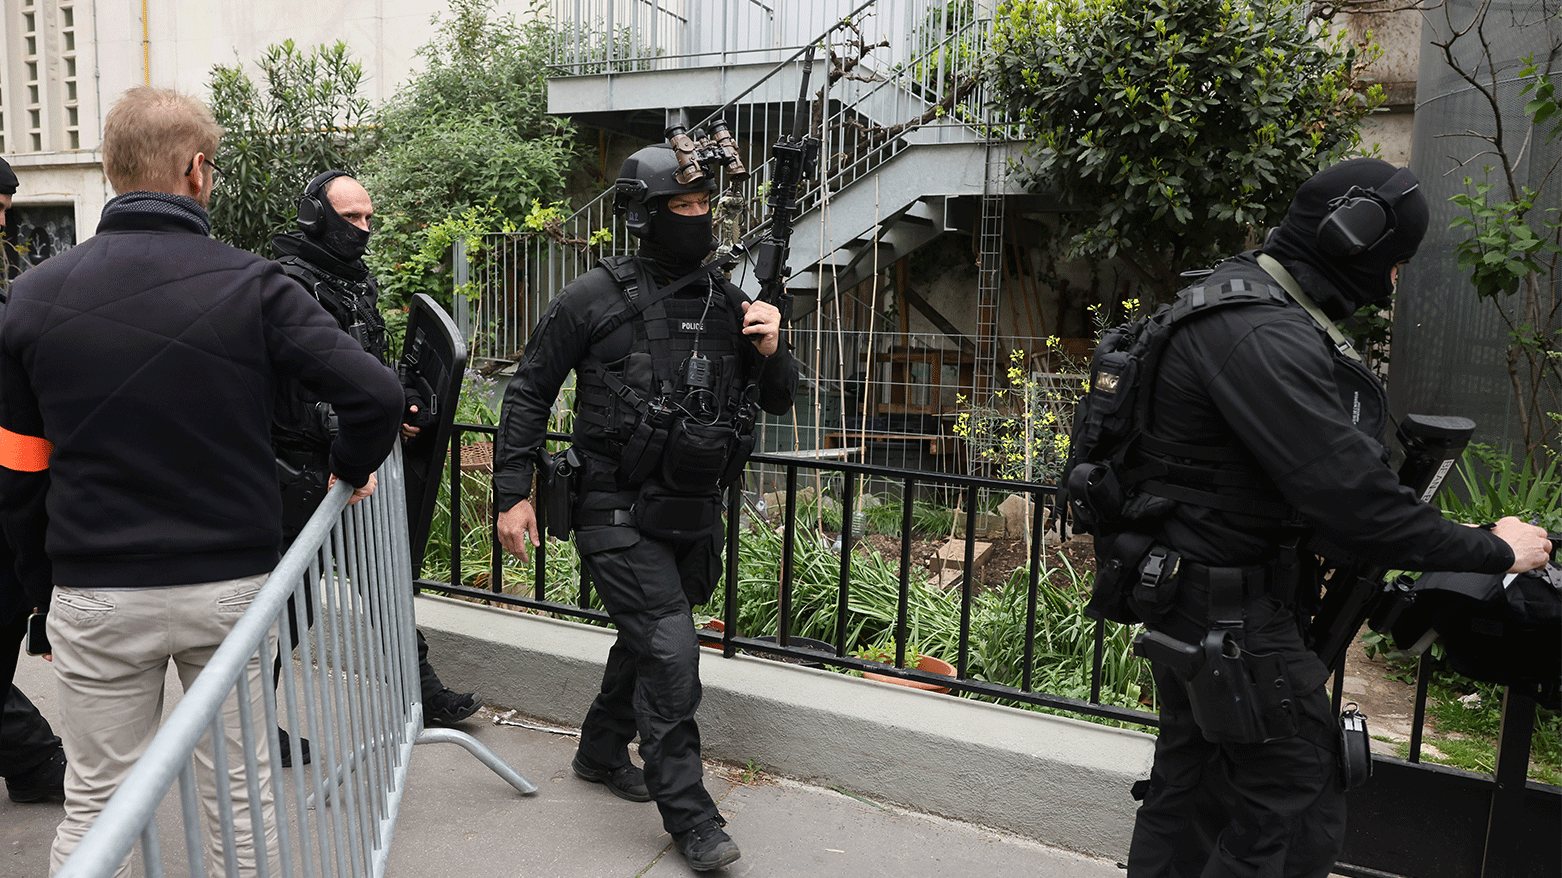 Elite police officers from the BRI (Brigade de recherche et d'intervention) or Research and Intervention Brigade, leave after an operation near the Iranian consulate, April 19, 2024, in Paris. (Photo: AP)